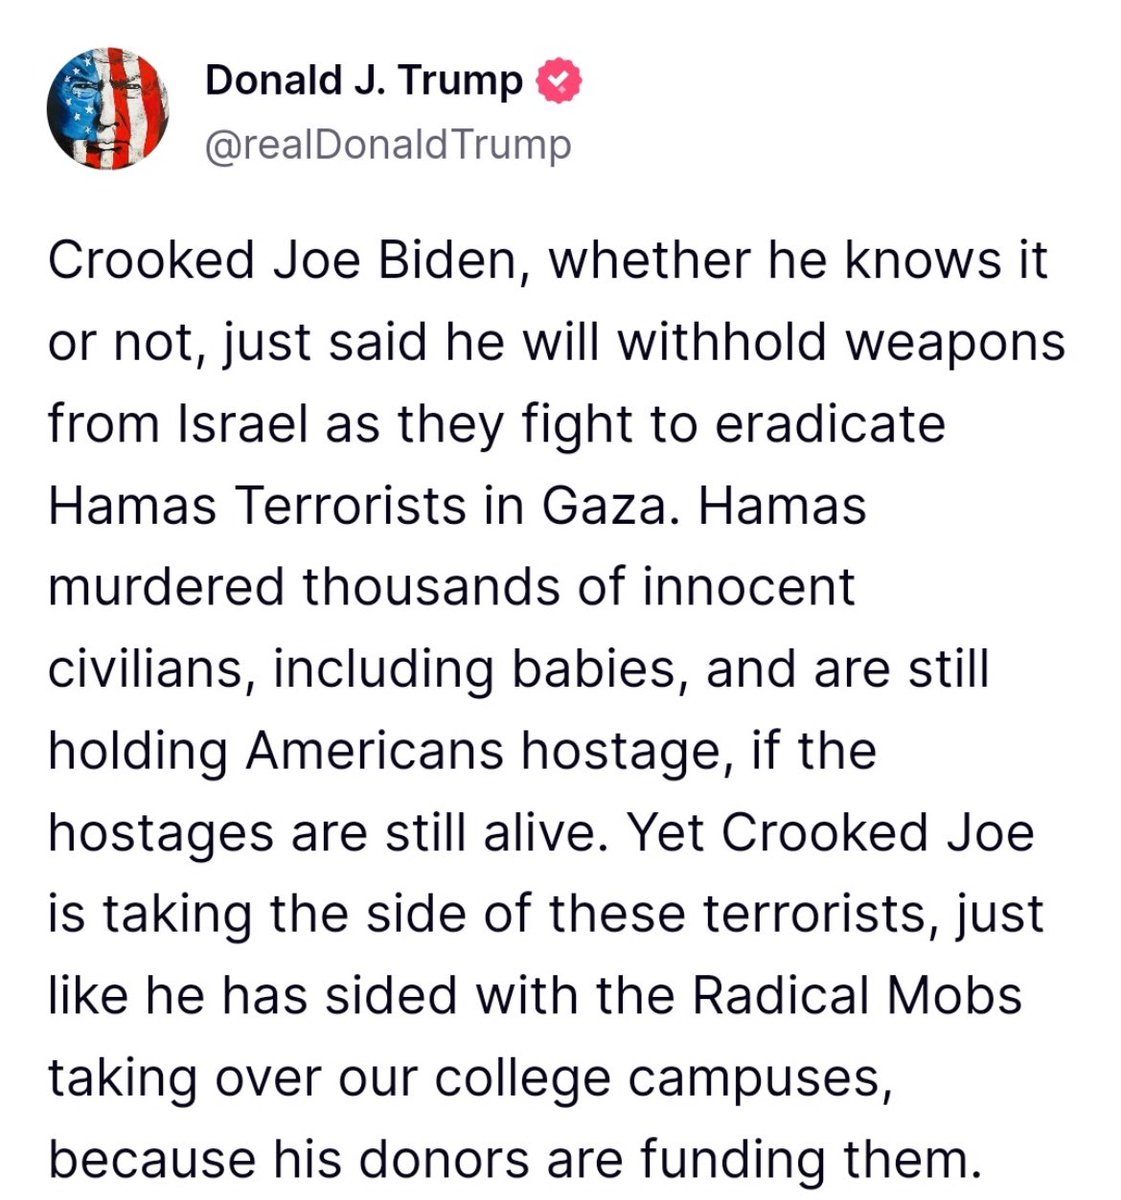 As much as I am opposed to what Biden has enabled in Gaza, as critical as I am of Biden’s unconditional support for Israel these past 7 months, and of America’s complicity in genocide, this, sadly, astonishingly, depressingly, is the ‘alternative’ come November: